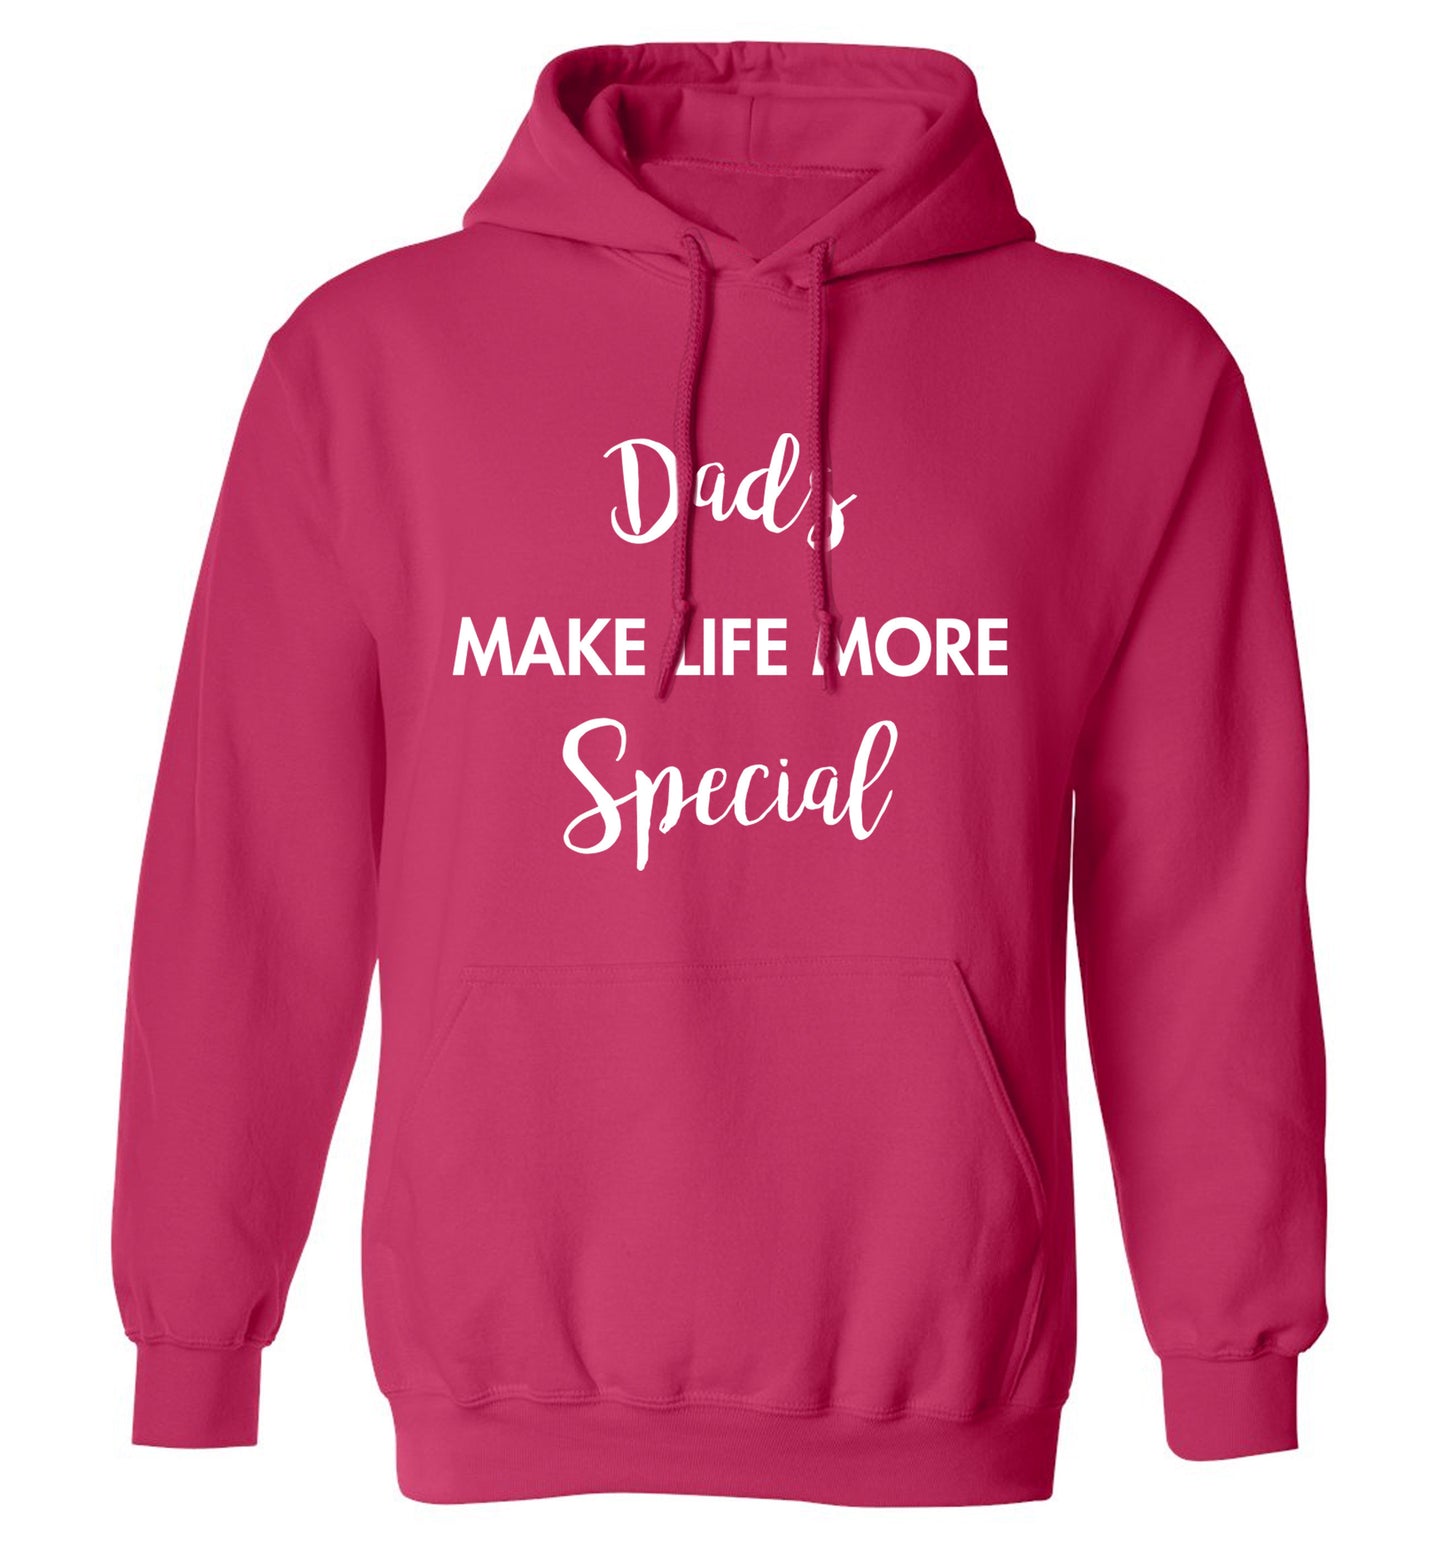 Dads make life more special adults unisex pink hoodie 2XL